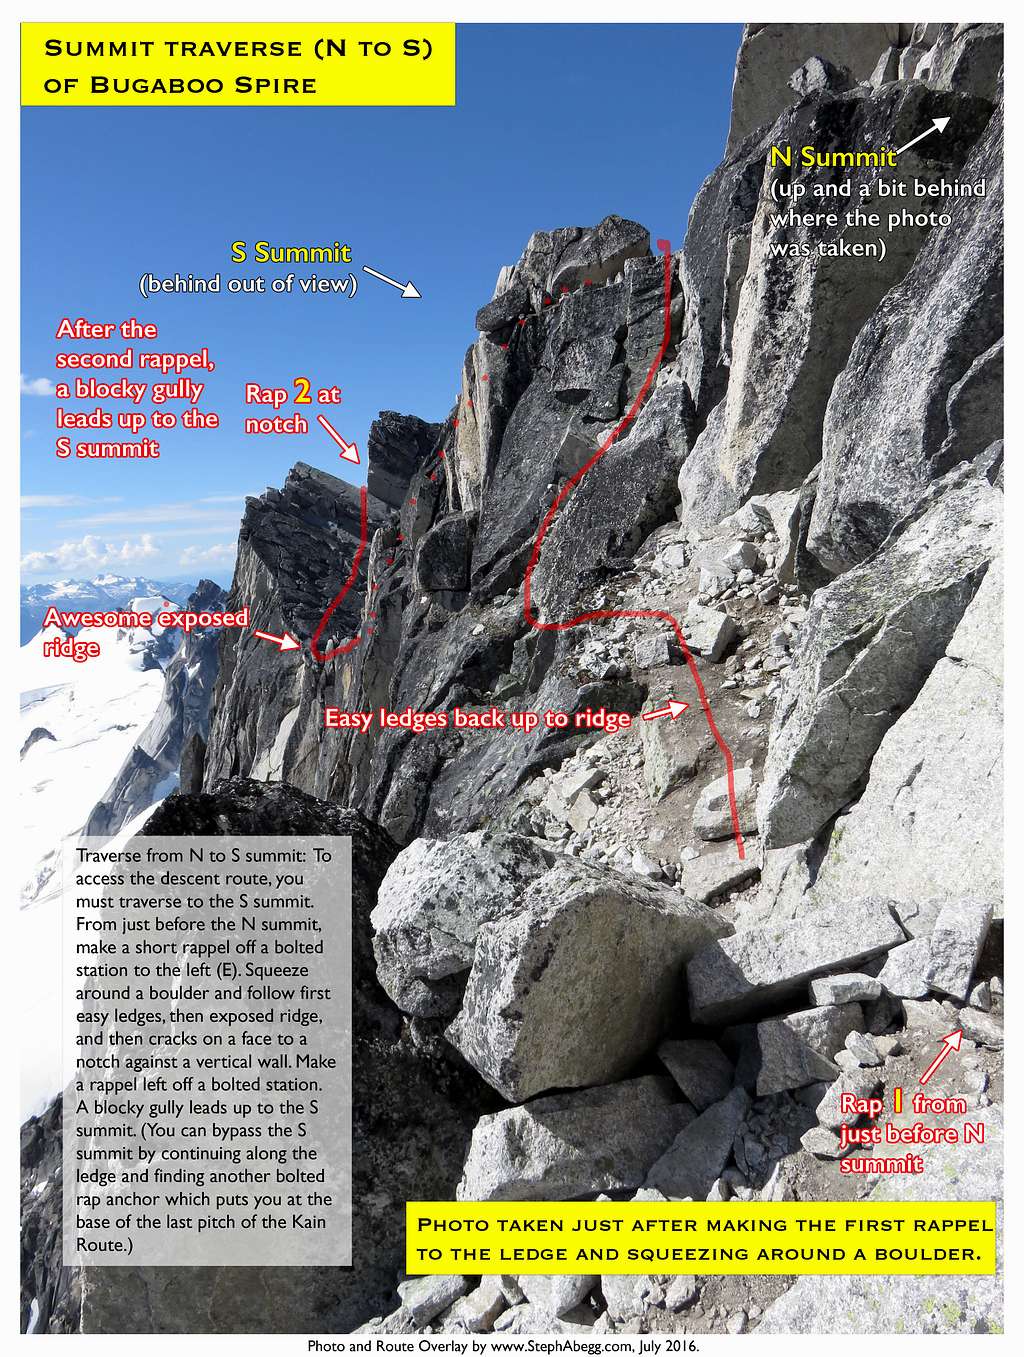 Route Overlay ridge traverse (N to S summit) of Bugaboo Spire